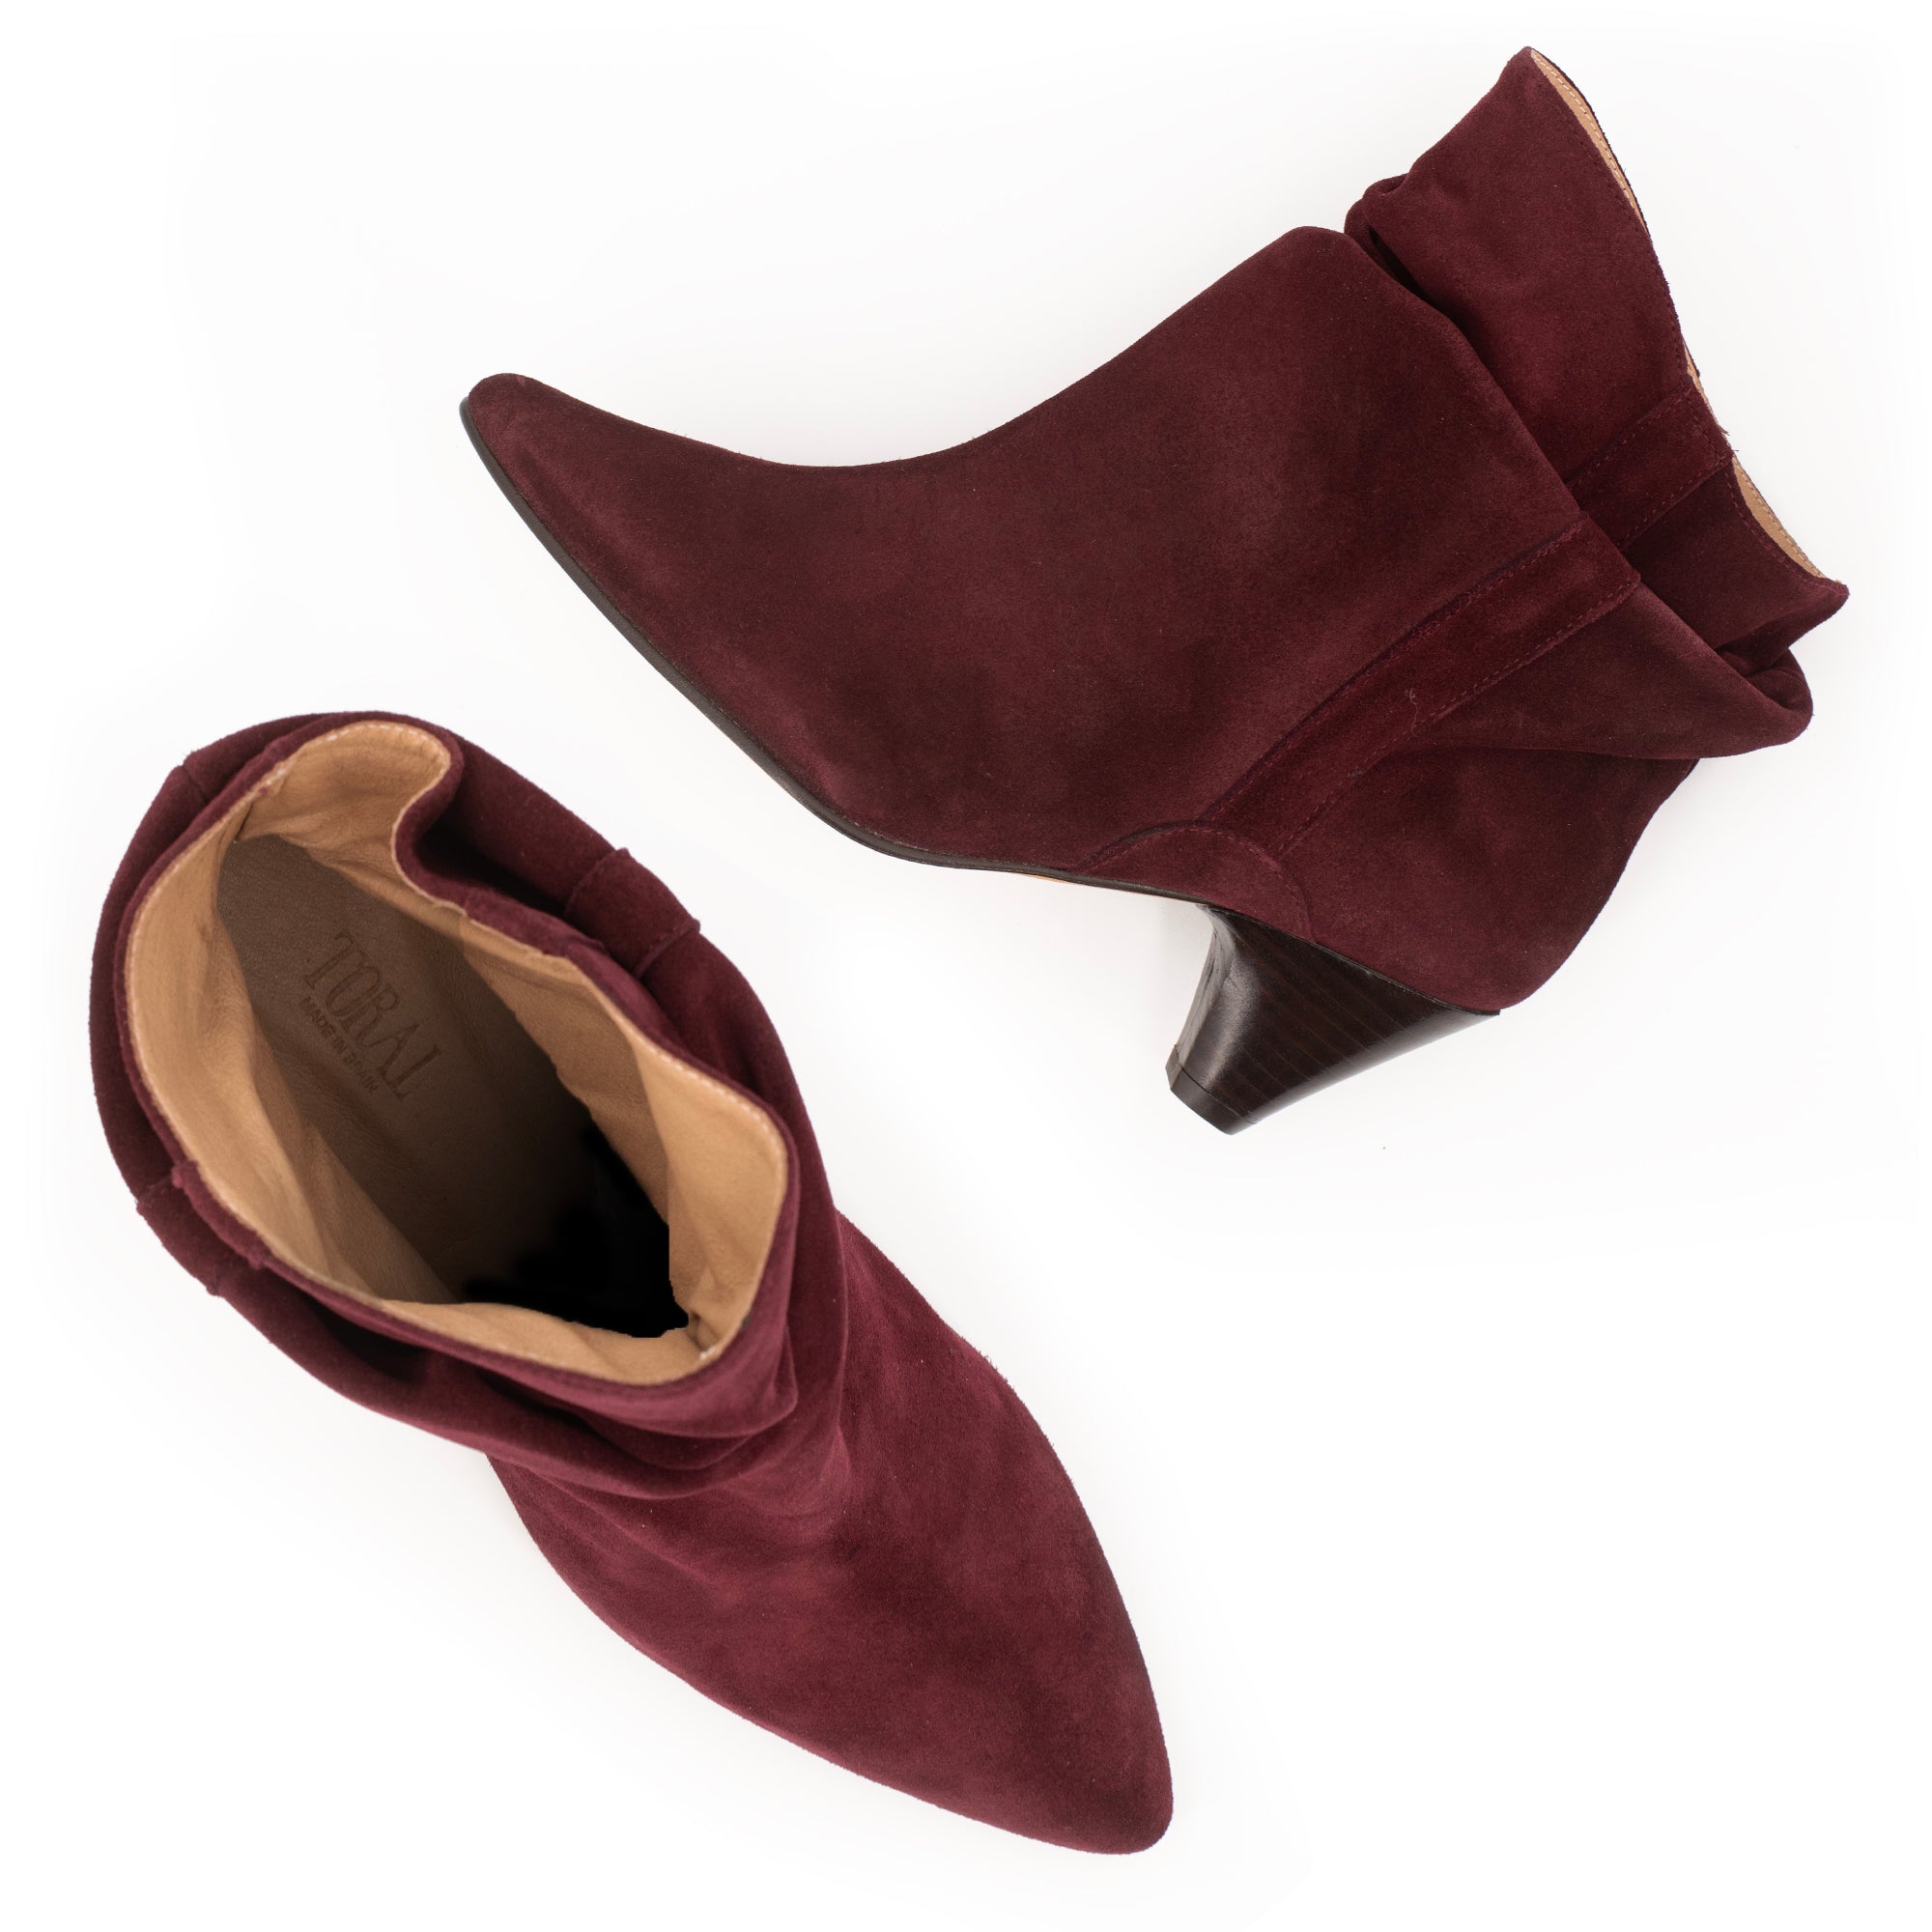 TORAL SUEDE ANKLE BOOTS